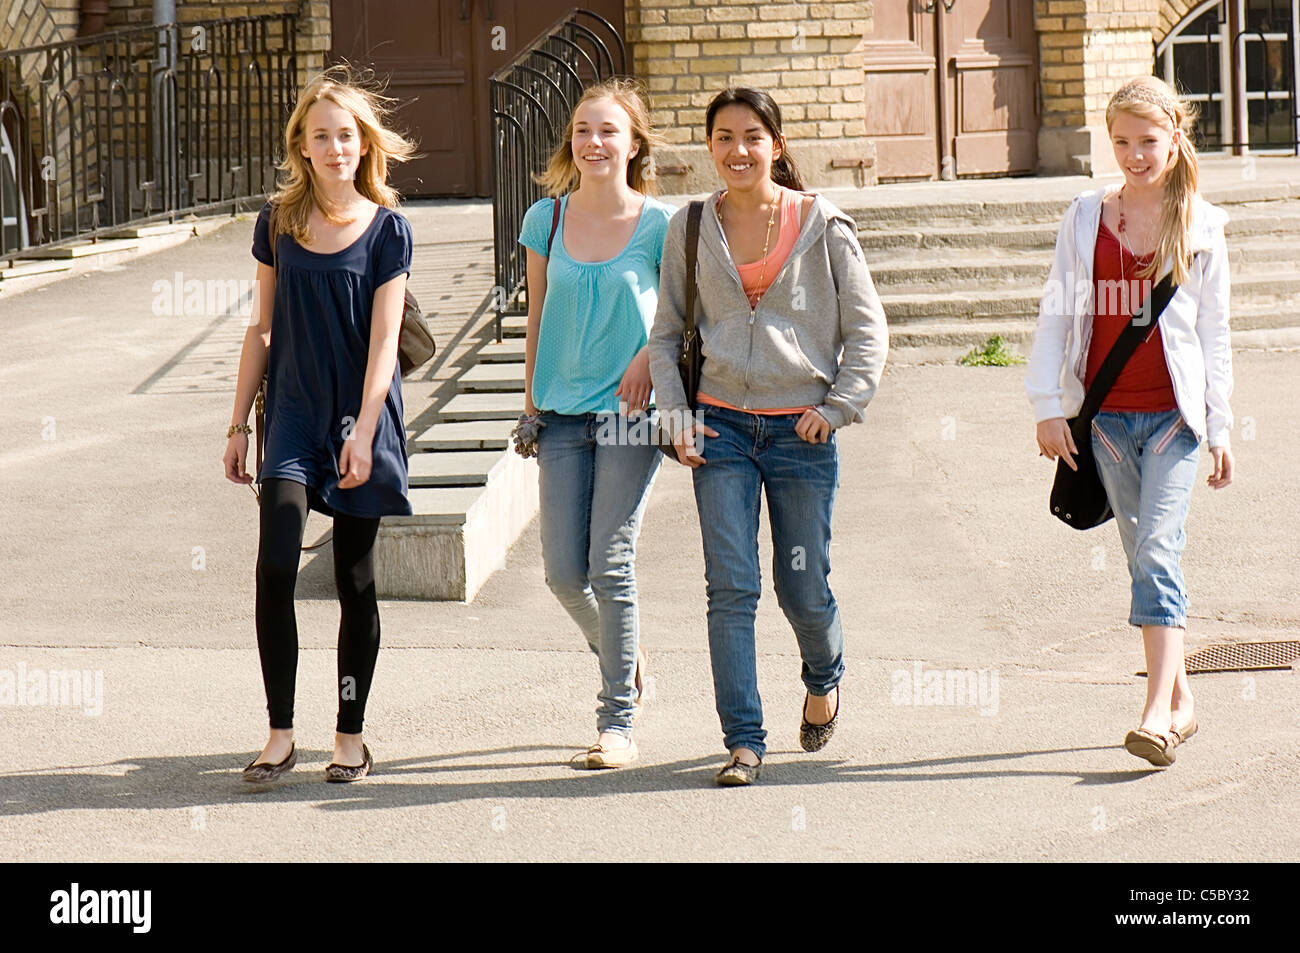 Four happy school girls walking together in the schoolyard Stock Photo -  Alamy